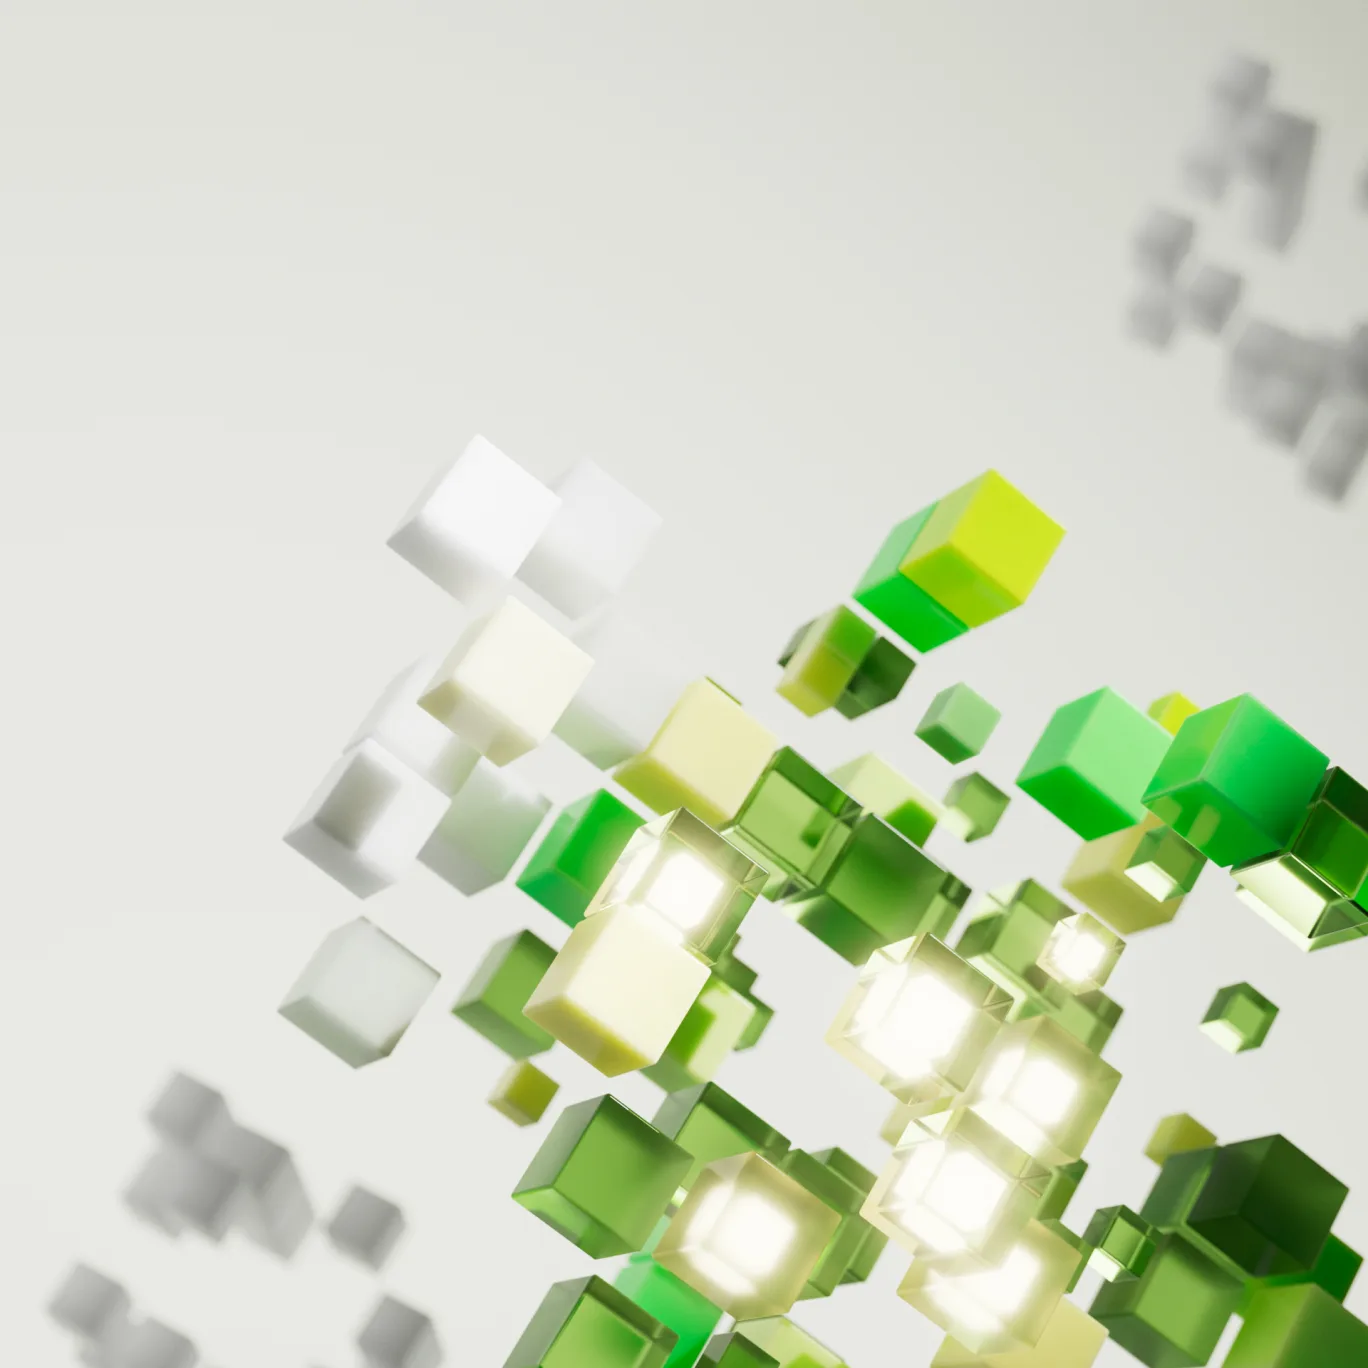 A close-up image of a digitally designed series of cubes that range from colorless to glowing vibrant shades of green. This visual represents how an idea ignites the potential of AI to contribute to human flourishing, magnifying endless possibilities in this rapid revolution.